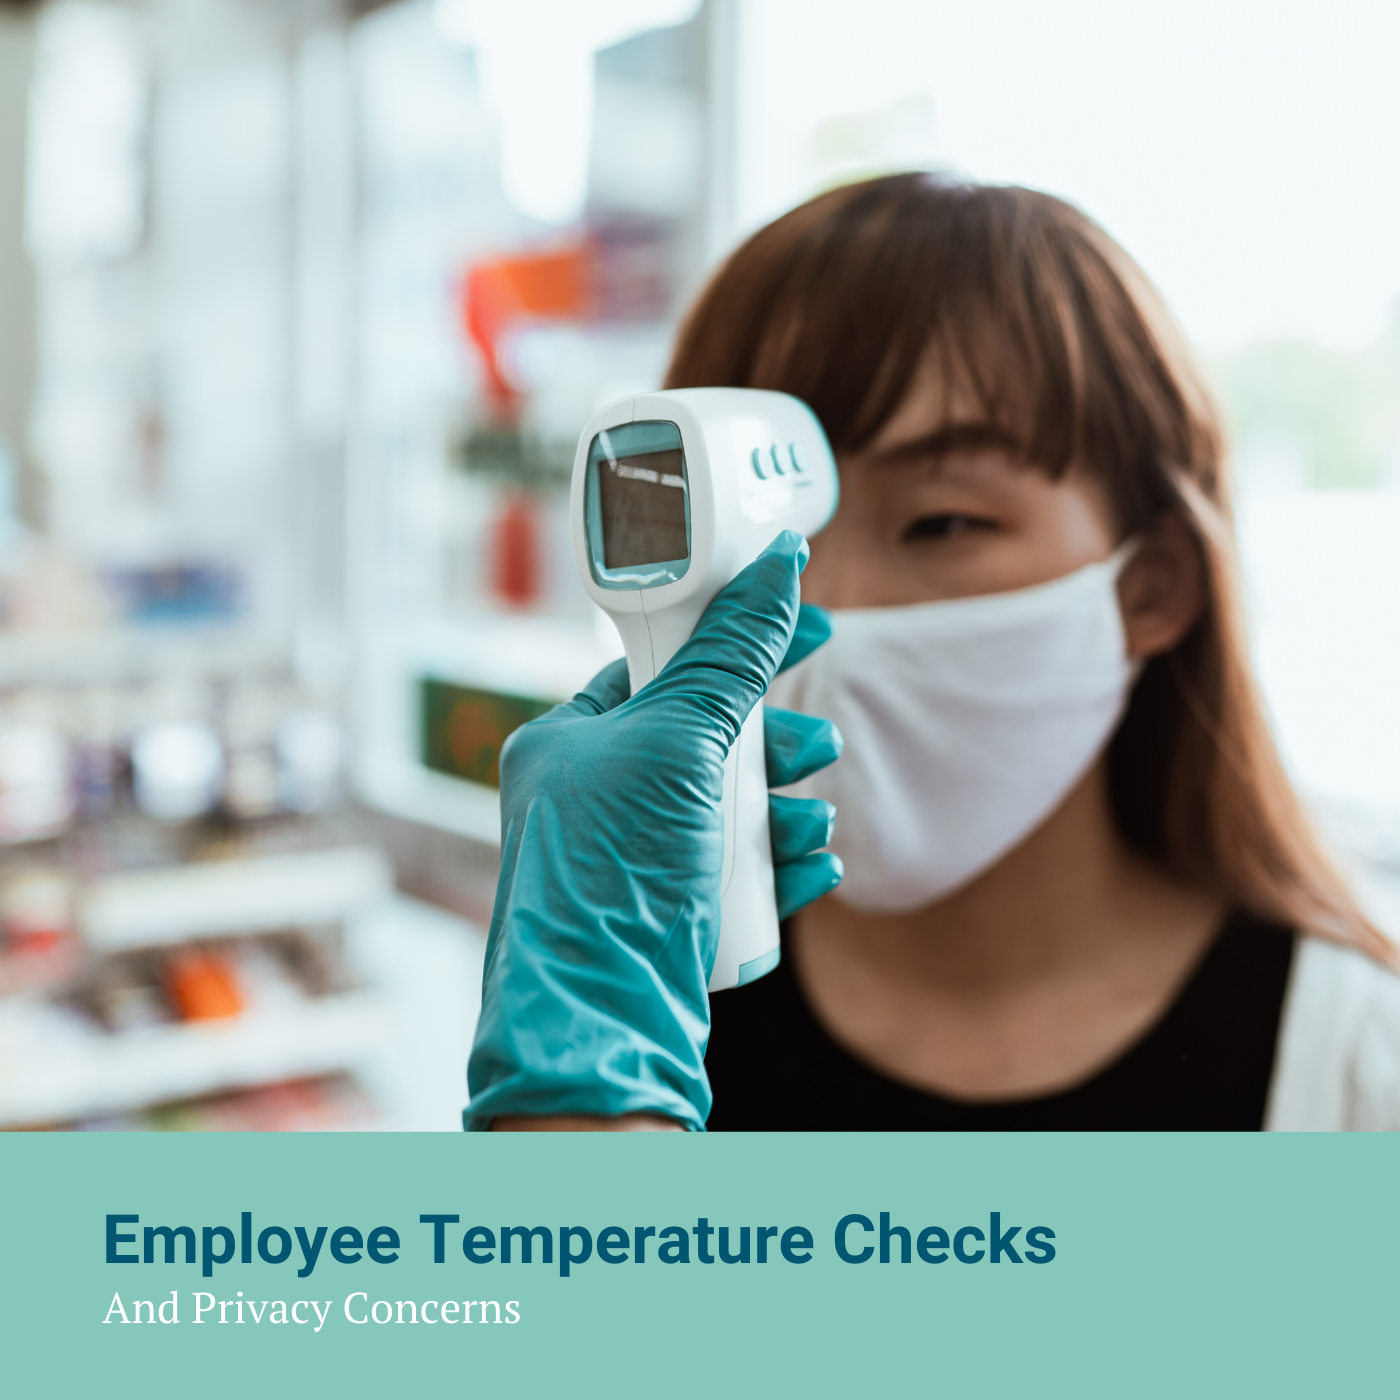 Employee Temperature Checks and Privacy Concerns Image